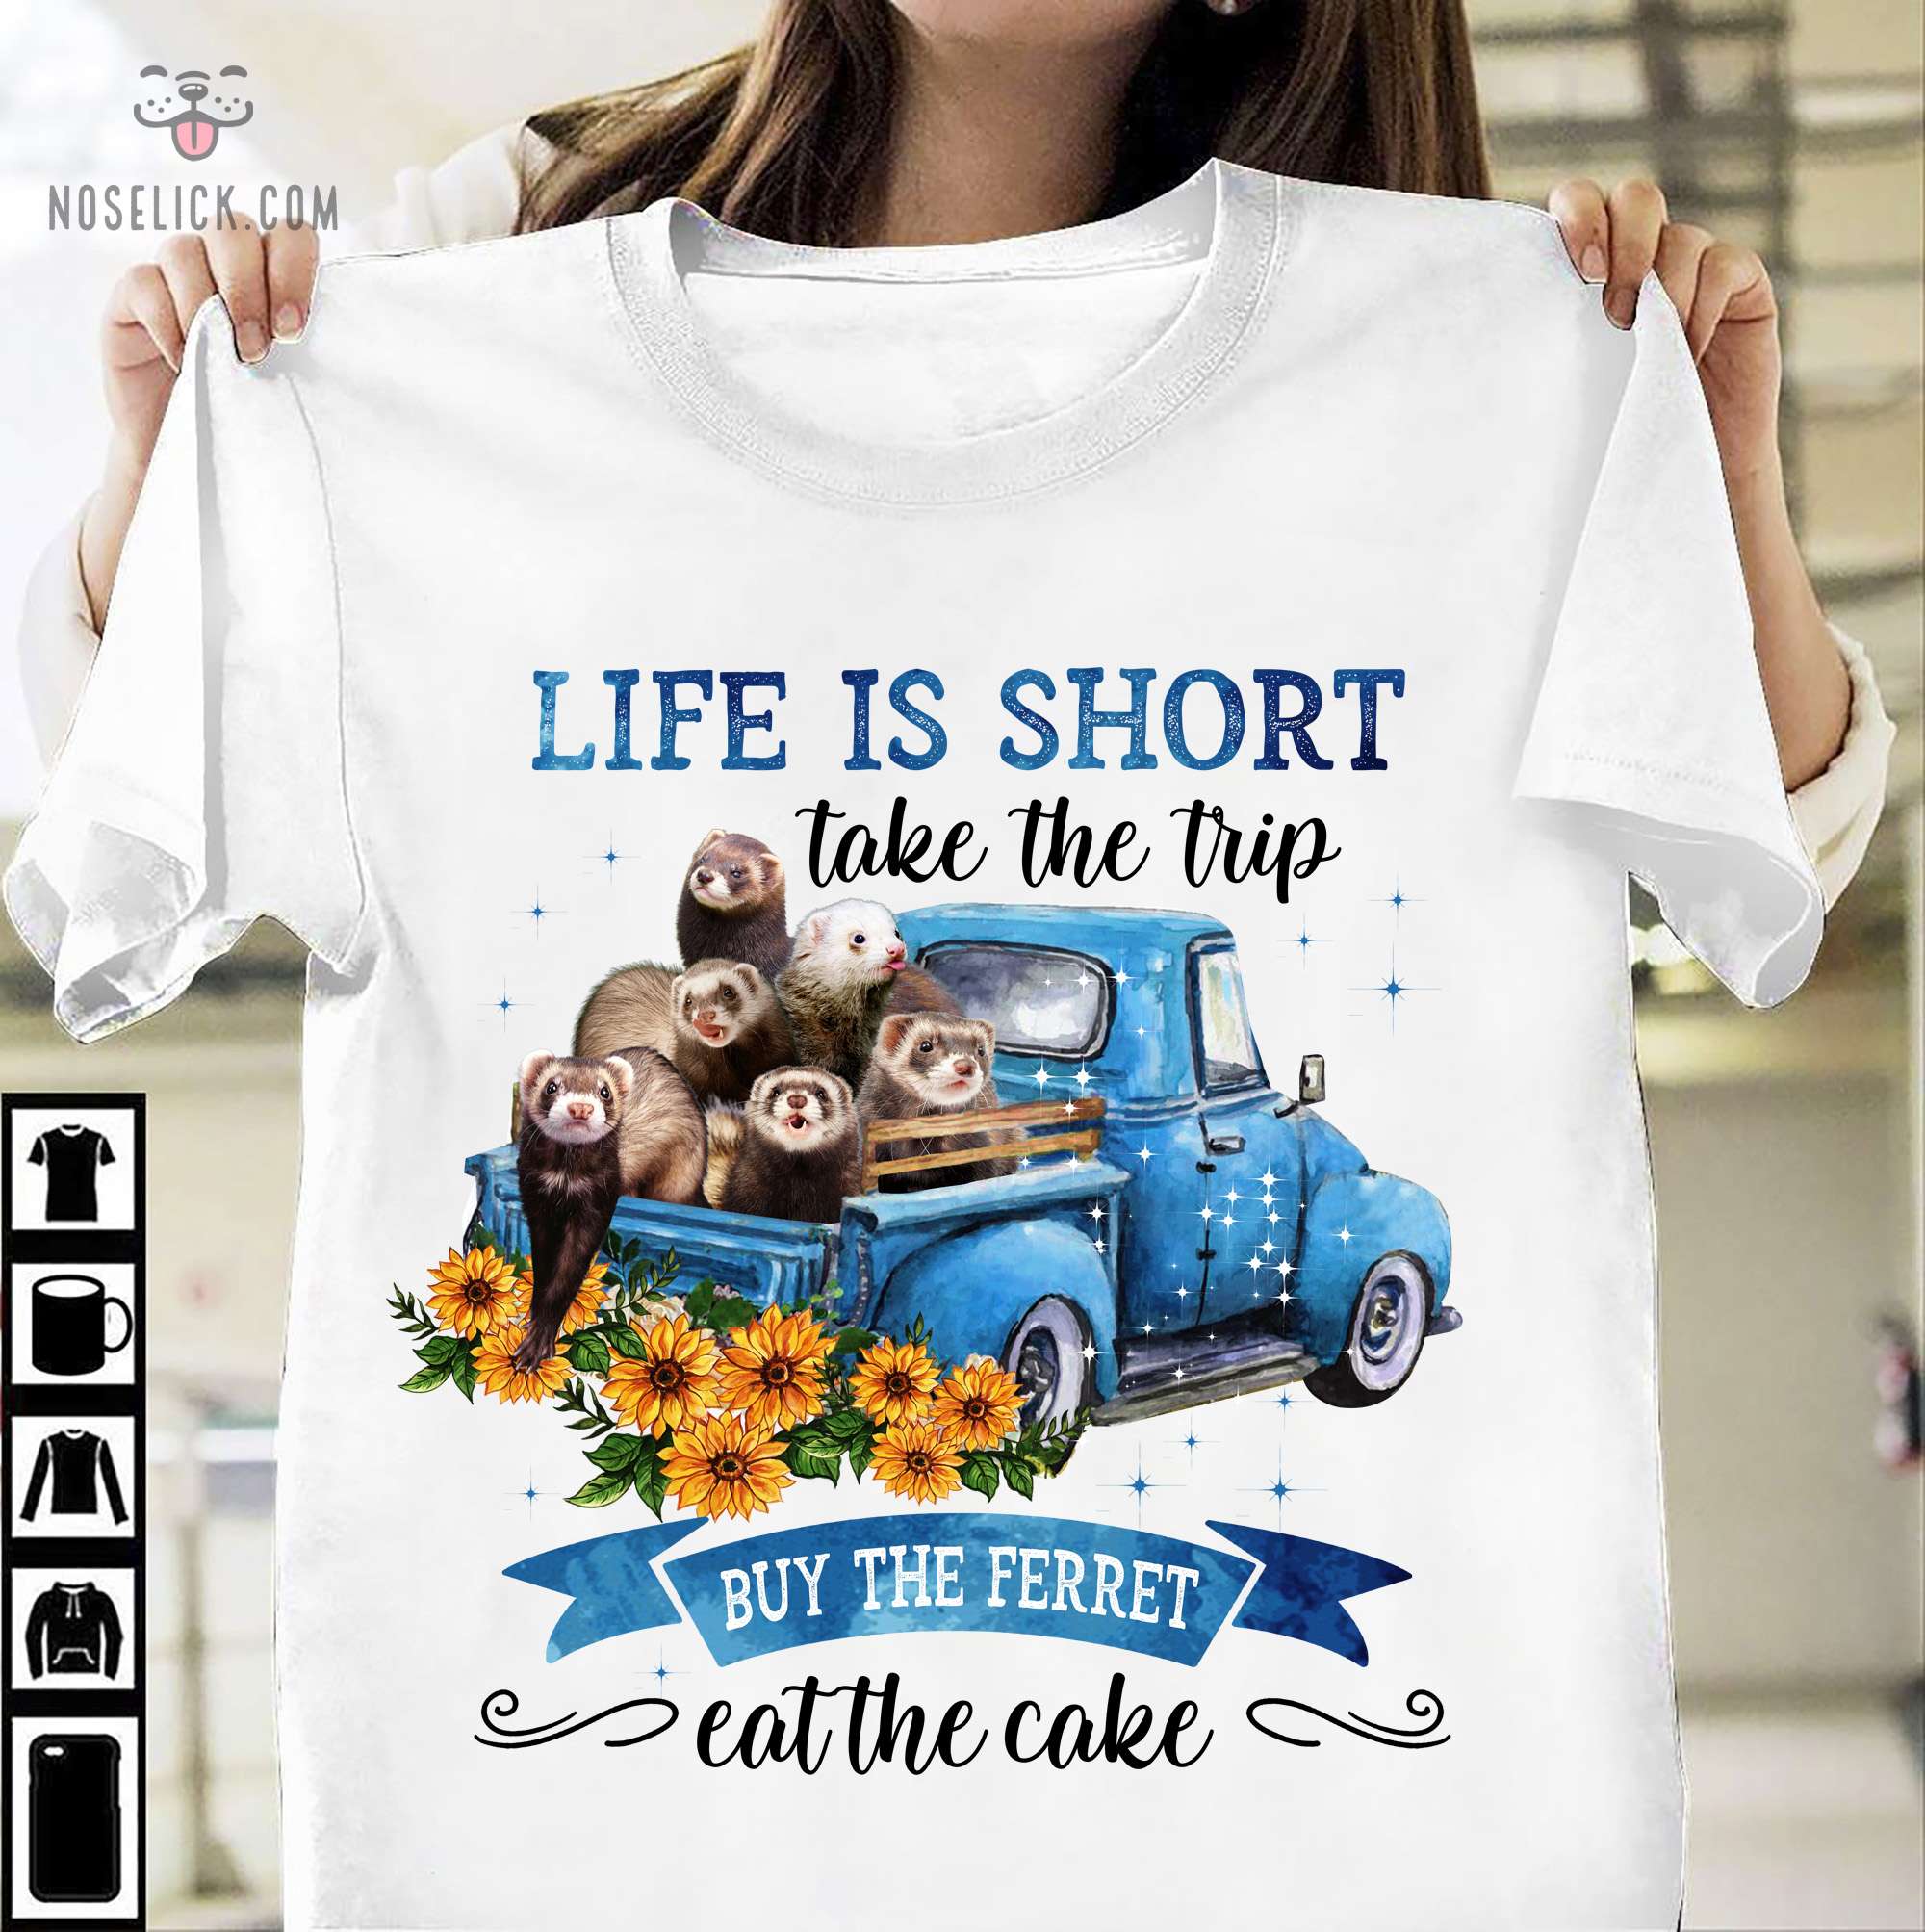 Life is short take the trip buy the Ferret eat the cake - Ferret on truck